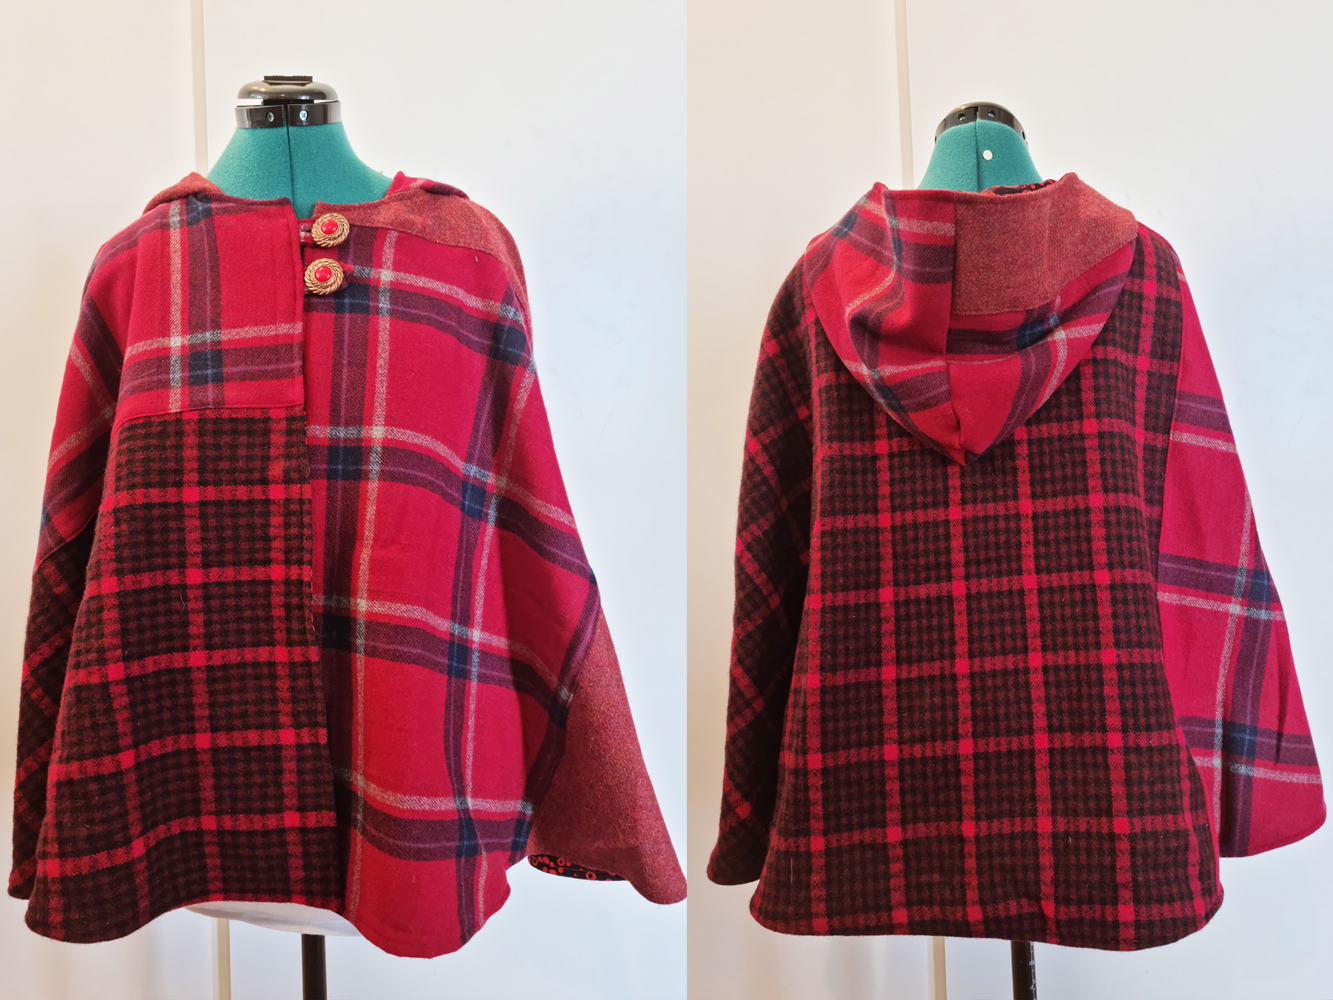 Up-cycled Woolen Cloaks